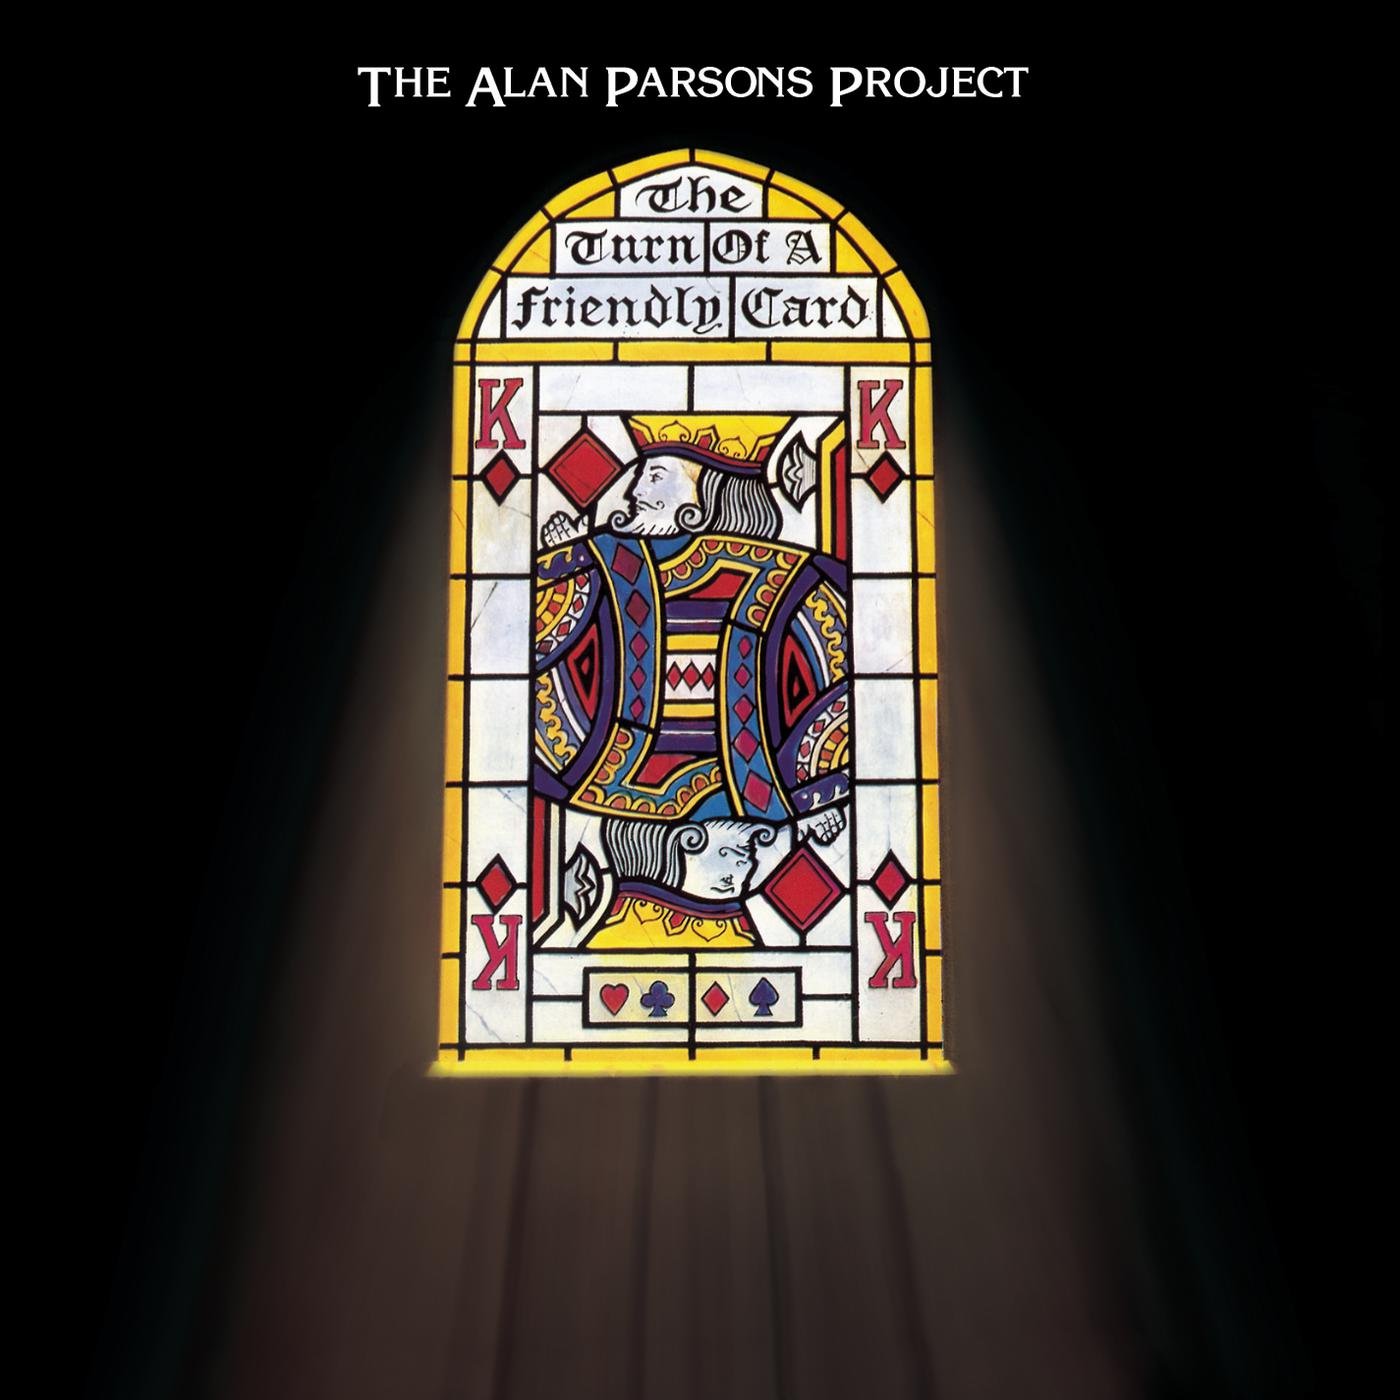 The Alan Parsons Project - The Turn Of A Friendly Card (1980/2015) [AcousticSounds DSF DSD64/2.82MHz + FLAC 24bit/88,2kHz]